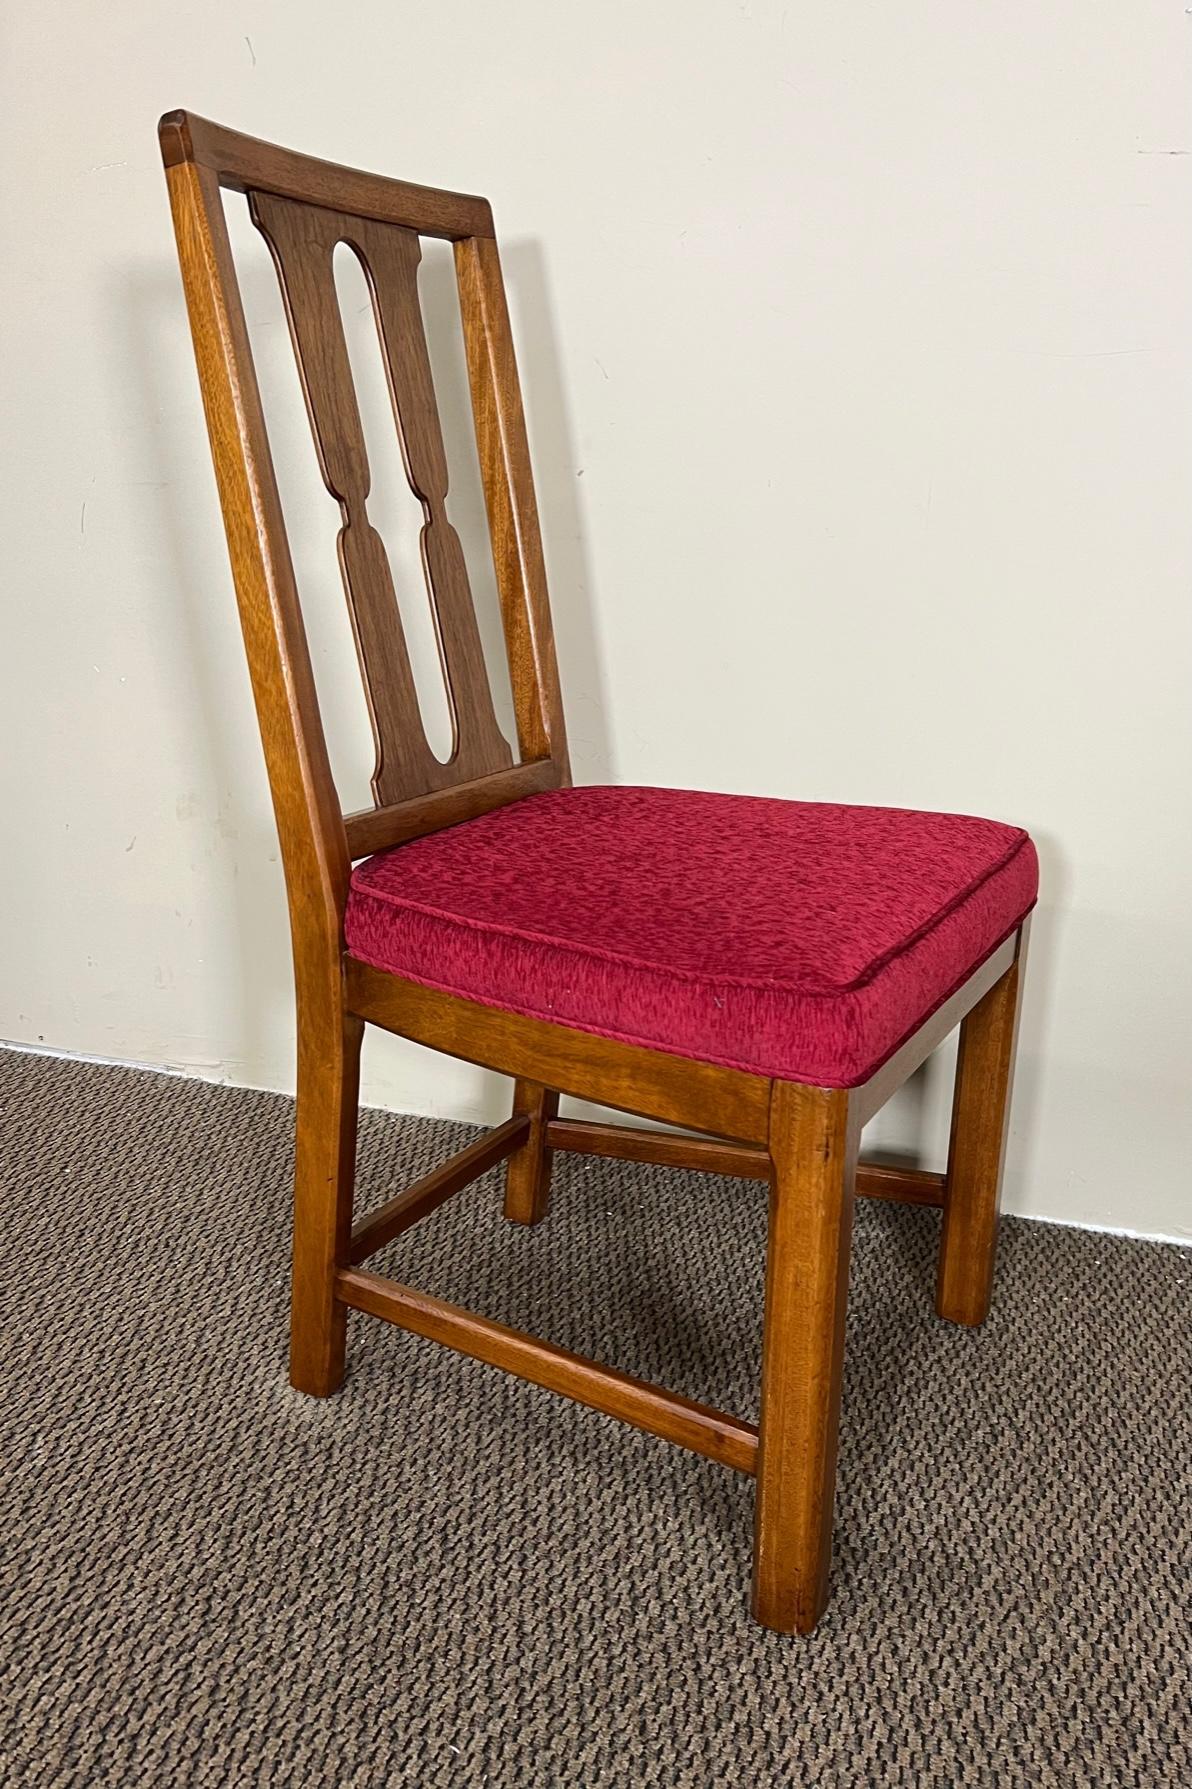 Set of 6 Mid-Century Modern Walnut Dining Chairs with Red Seats by Henredon In Good Condition For Sale In Atlanta, GA